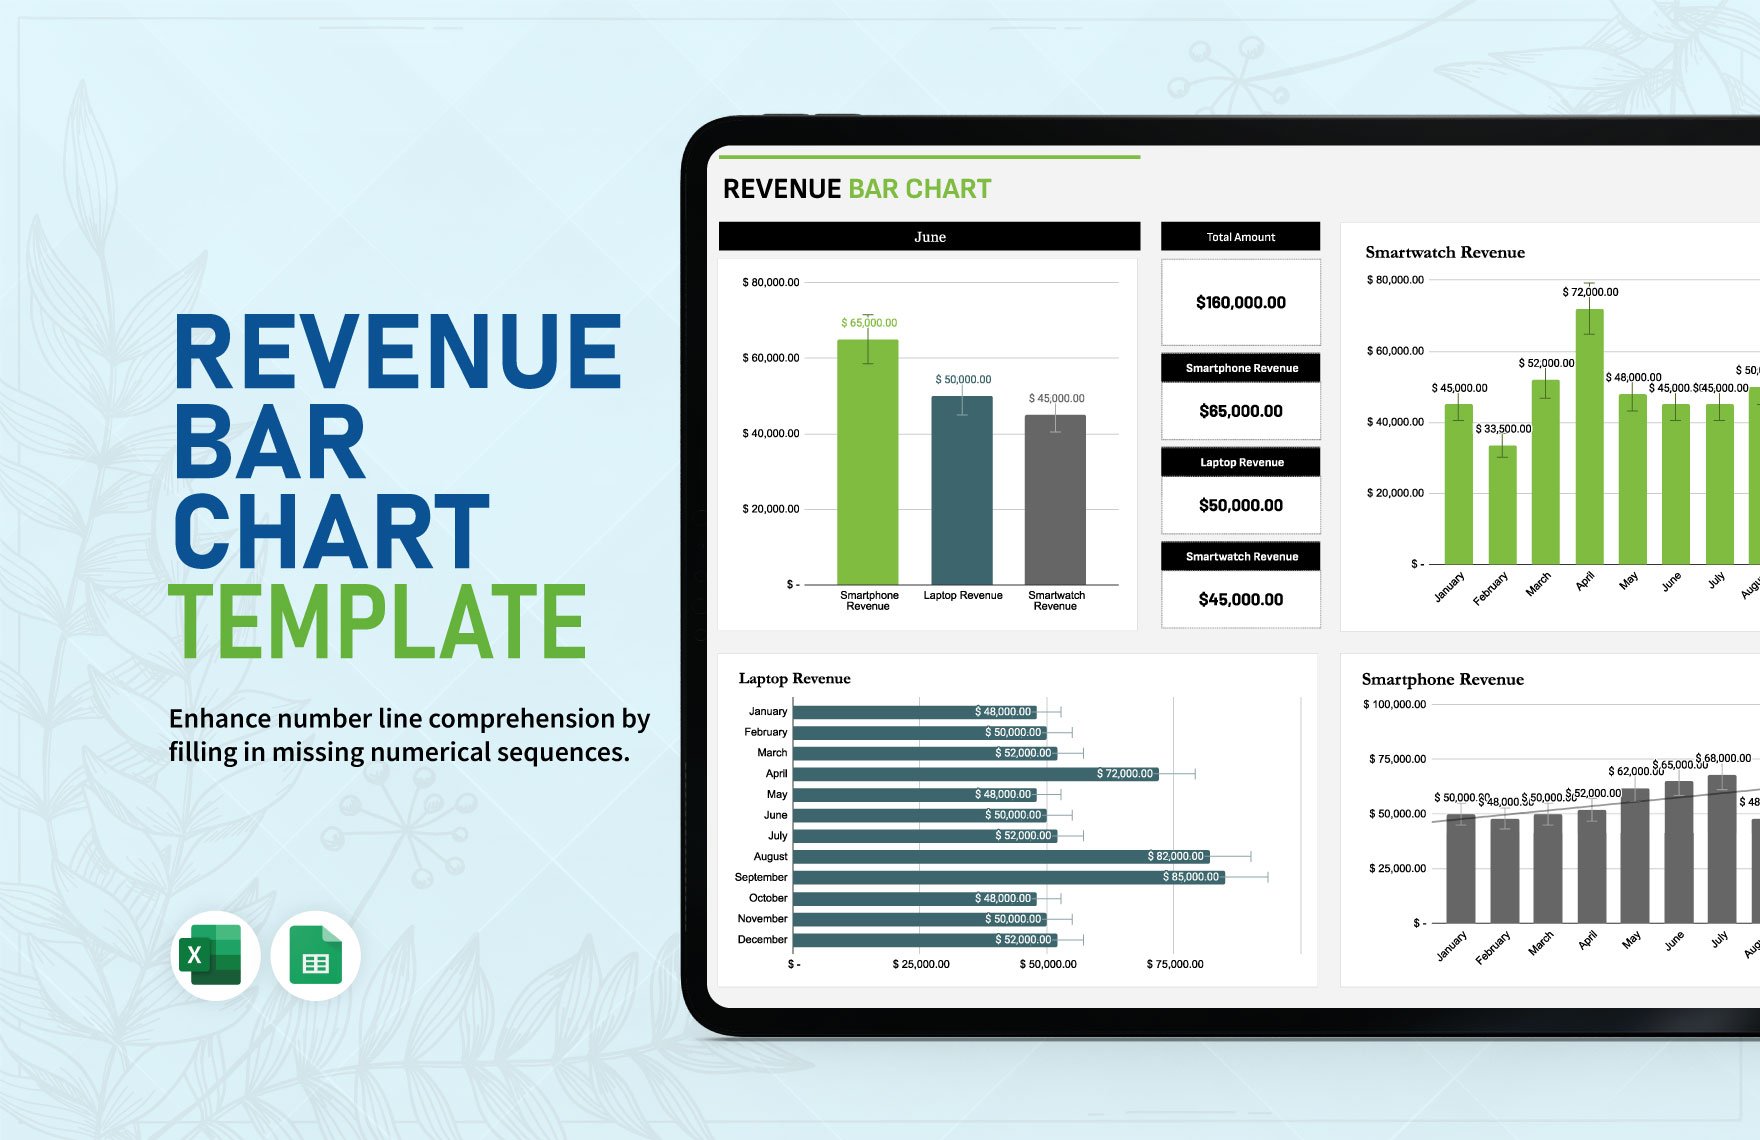 Revenue Bar Chart Template in Excel, Google Sheets